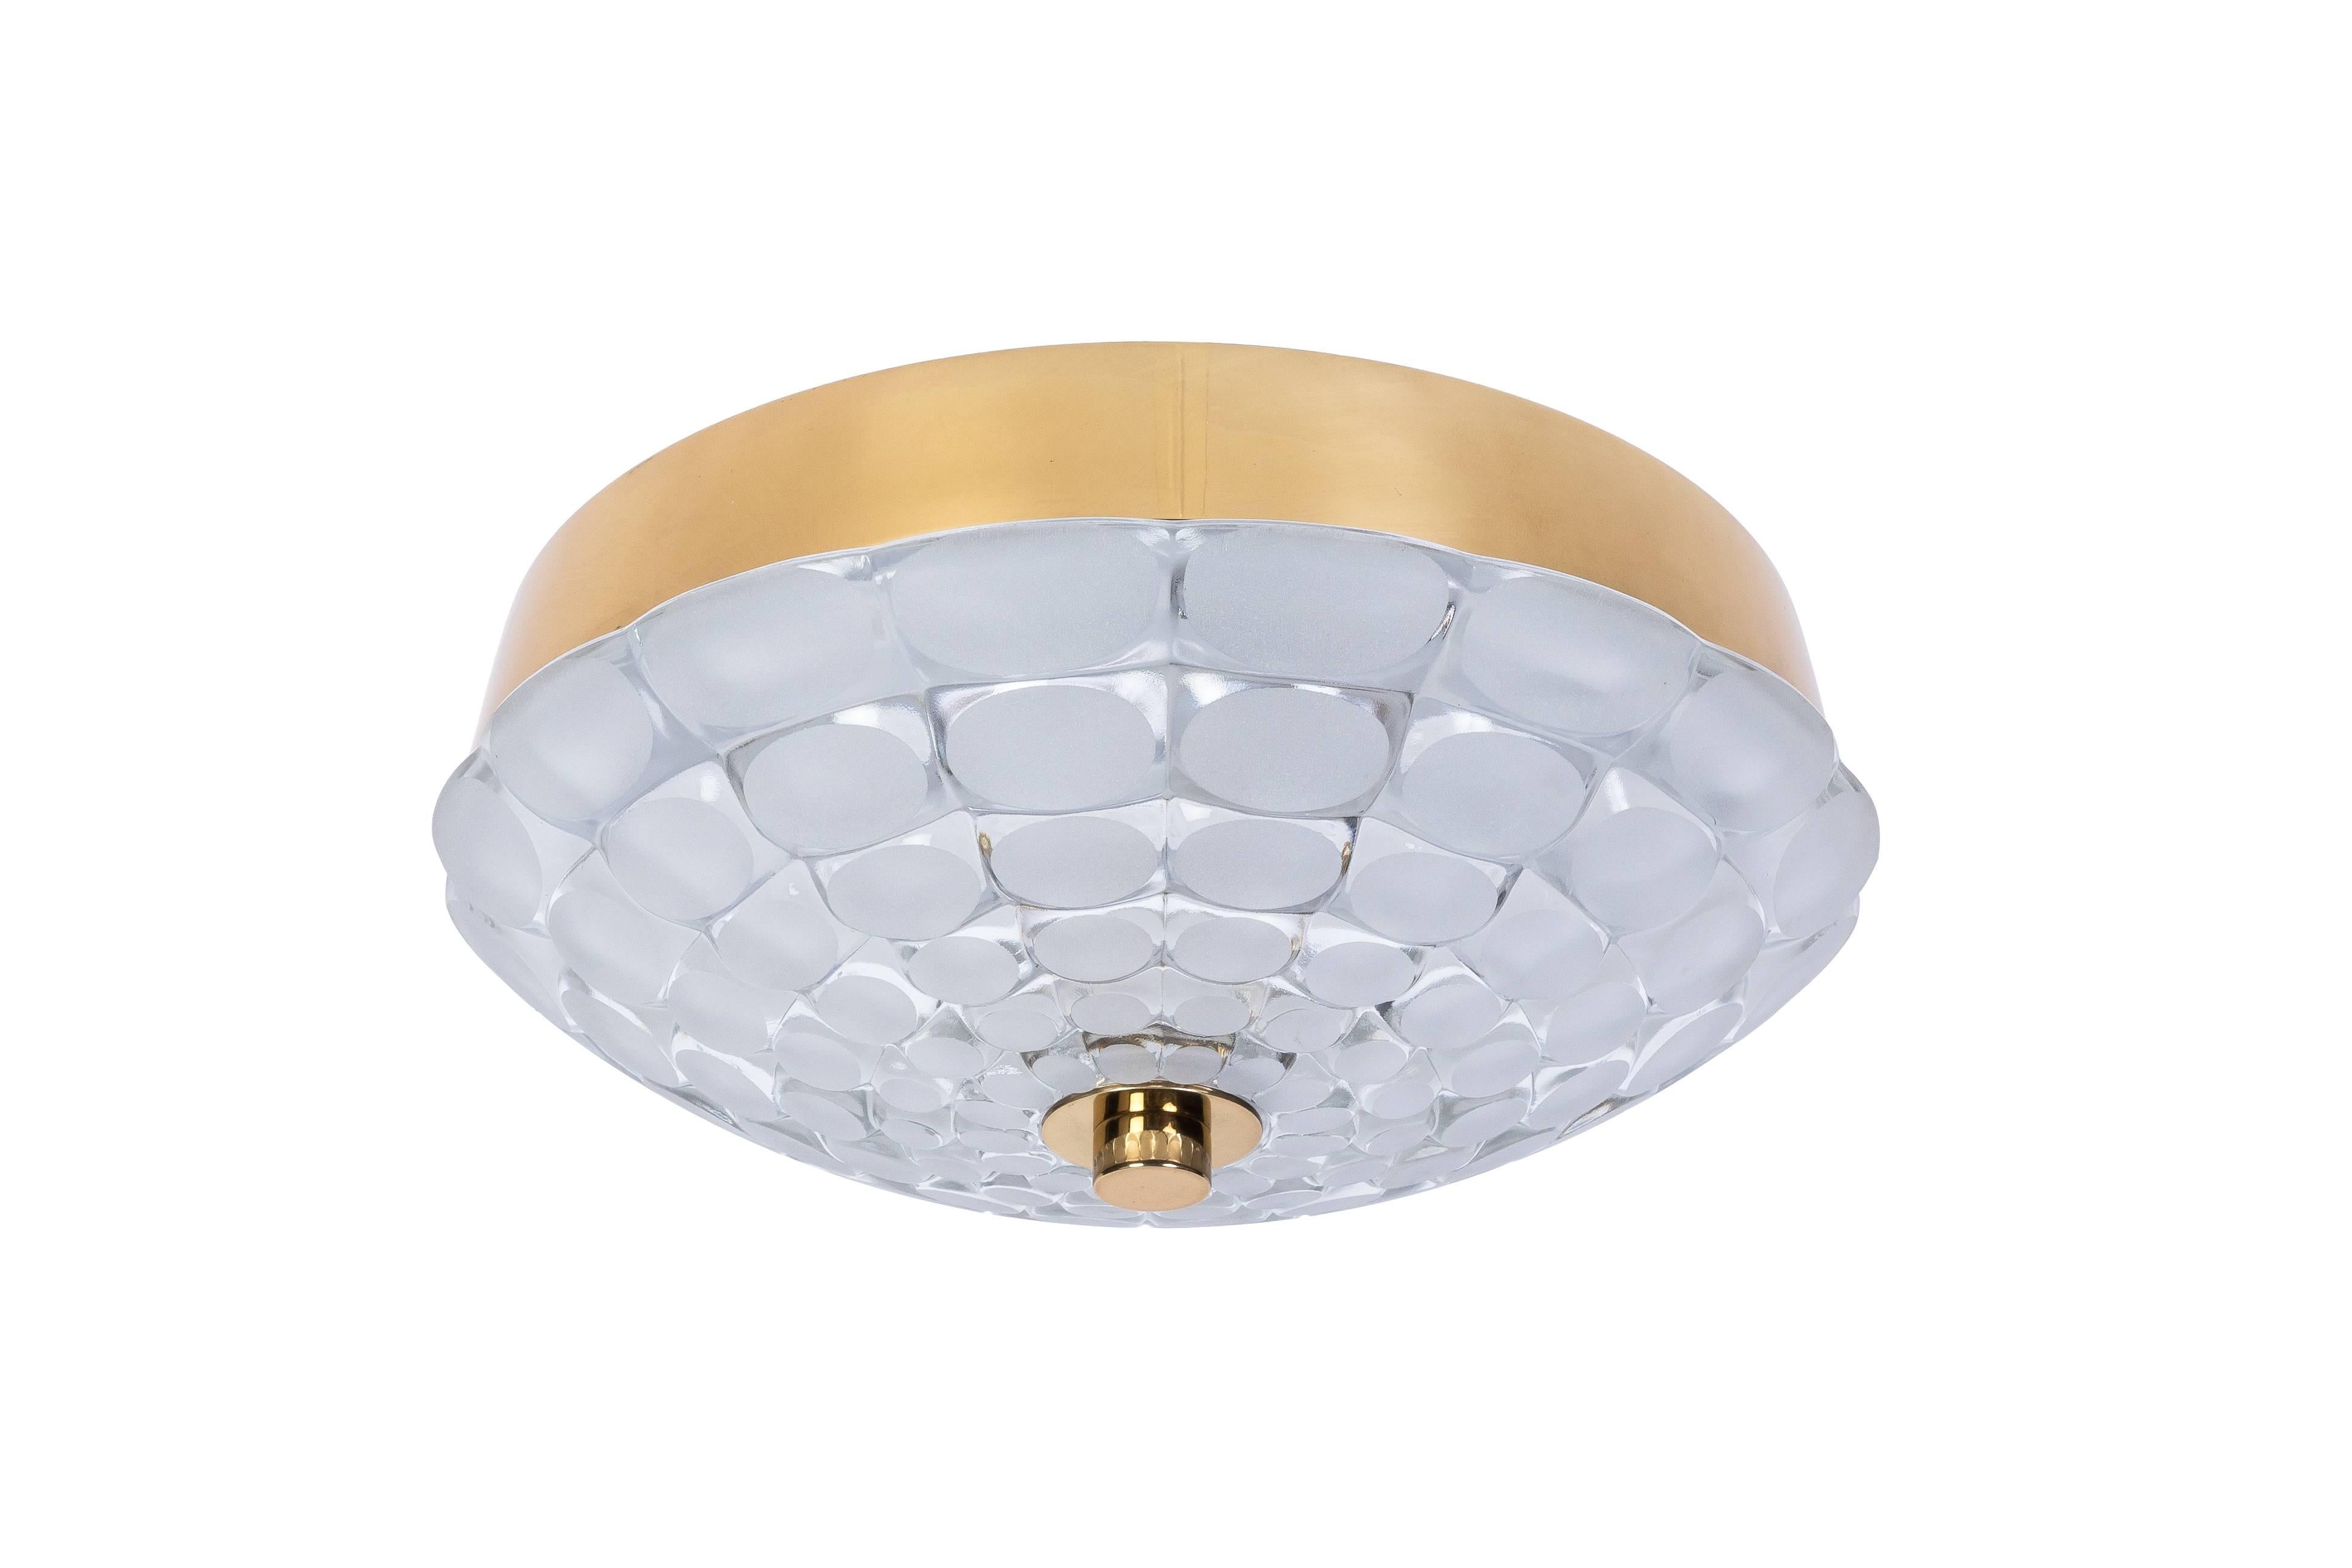 This gorgeous Mid-Century Modernist sconce or wall ceiling flush mount was designed by Kalmar. It features a brass frame and frosted curved cut-glass shades.